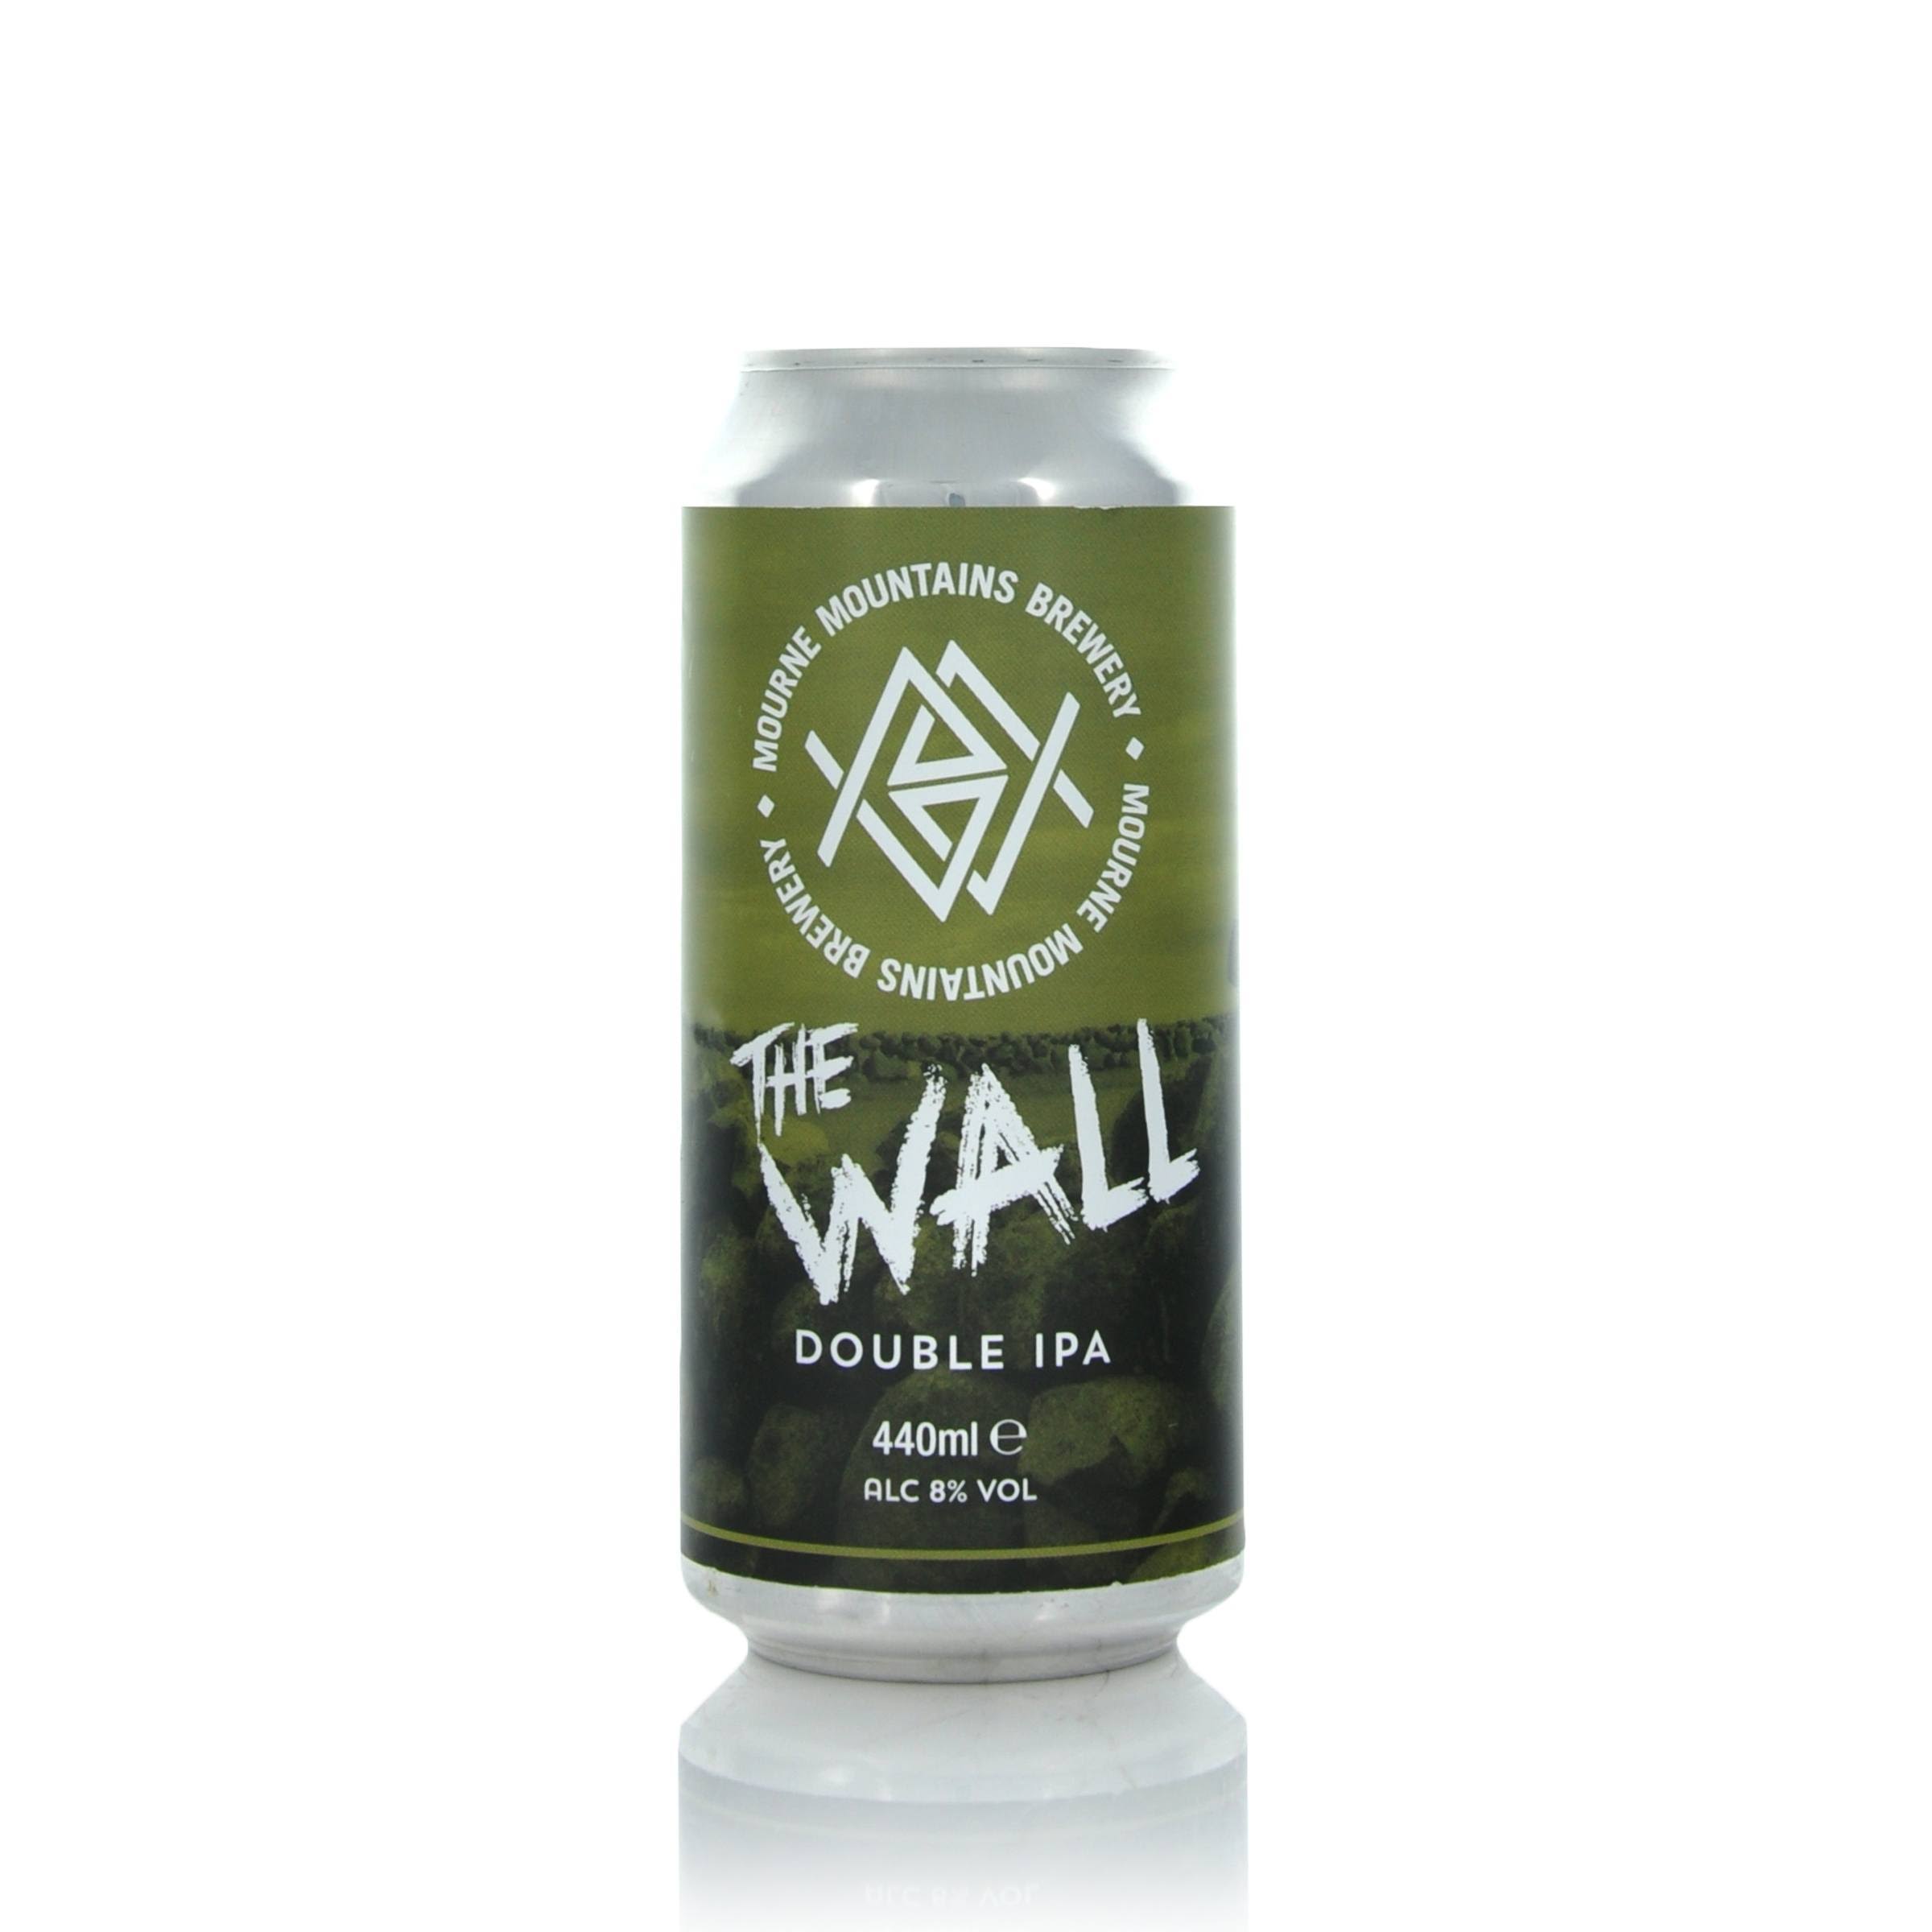 Mourne Mountains Brewery The Wall 8.0% DIPA